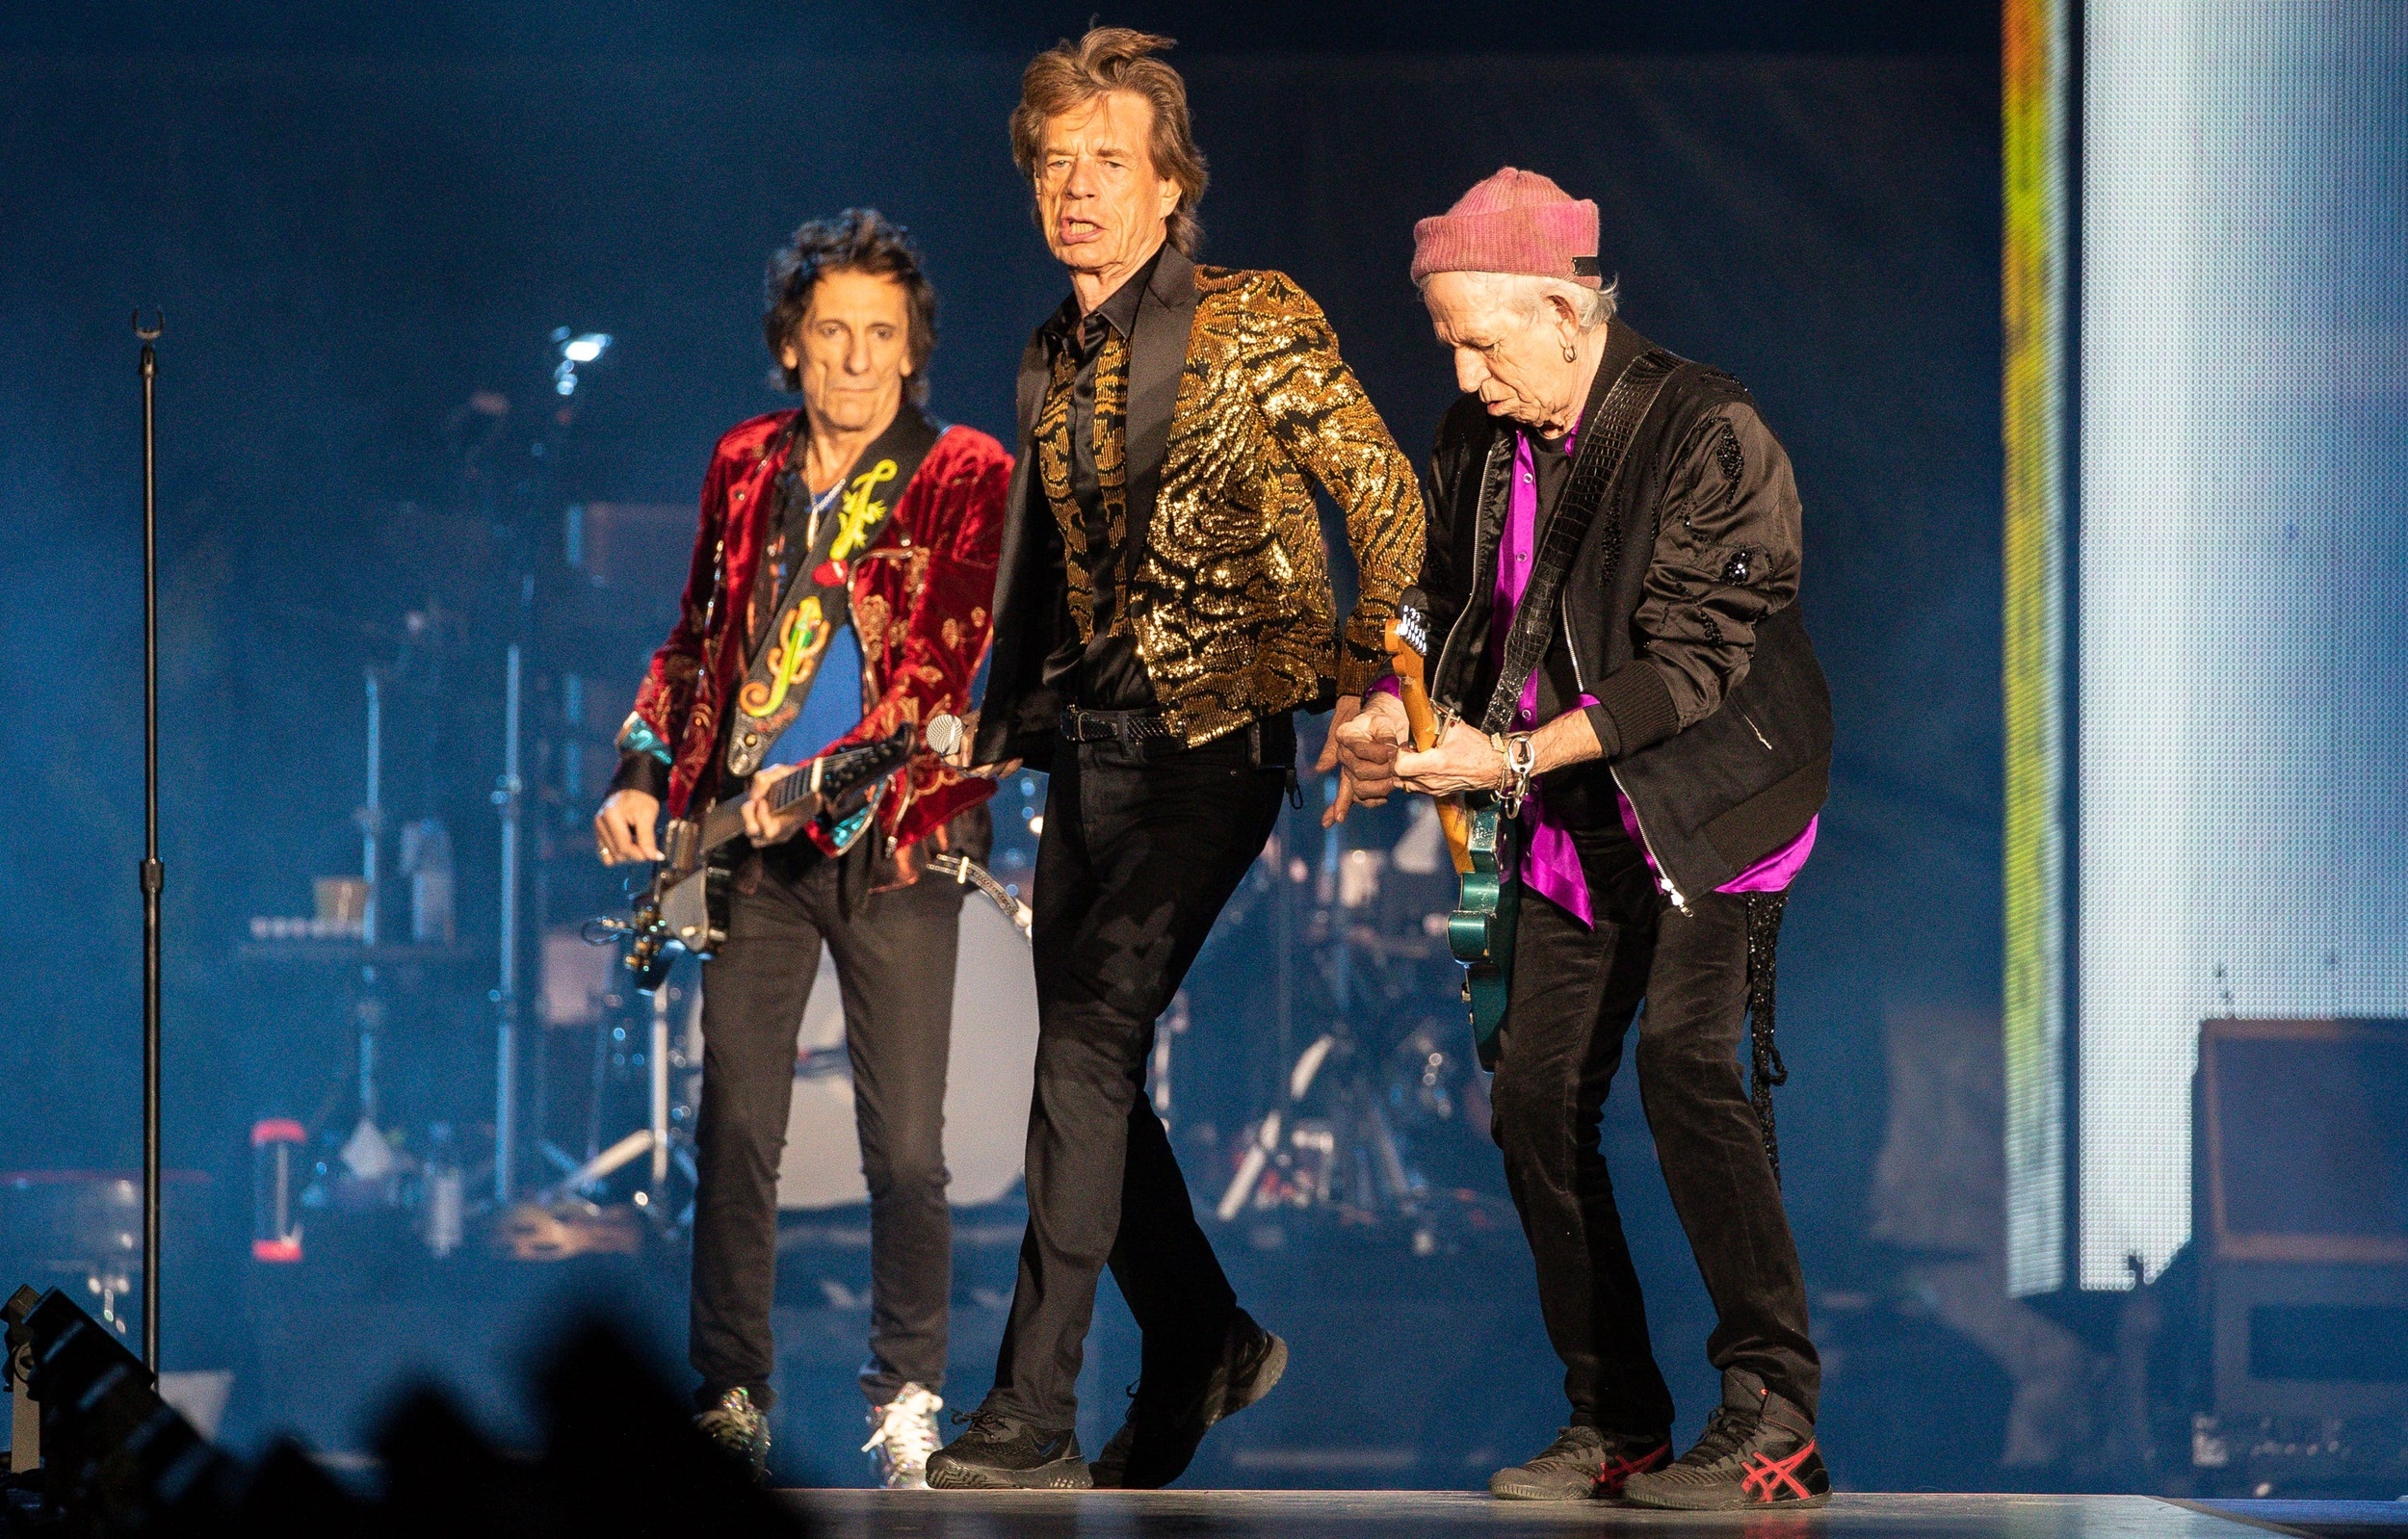 <p>Mick and Keith are both 80 years old and Ronnie Wood is 76, but the trio that currently makes up the Rolling Stones official lineup is scheduled to play 19 shows (in 16 scheduled cities) this year from late April to mid-July of this year. And we expect the energy level to be on high. While the band will play numbers from 2023's <em>Hackney Diamonds</em>, including the Grammy Award-nominated "<a href="https://www.youtube.com/watch?v=_mEC54eTuGw">Angry</a>," we know fans will hear plenty of those legendary classics such as "(I Can't Get No) Satisfaction" and "Jumpin' Jack Flash."</p><p>You may also like: <a href='https://www.yardbarker.com/entertainment/articles/the_25_best_anime_movies_021324/s1__38909412'>The 25 best anime movies</a></p>